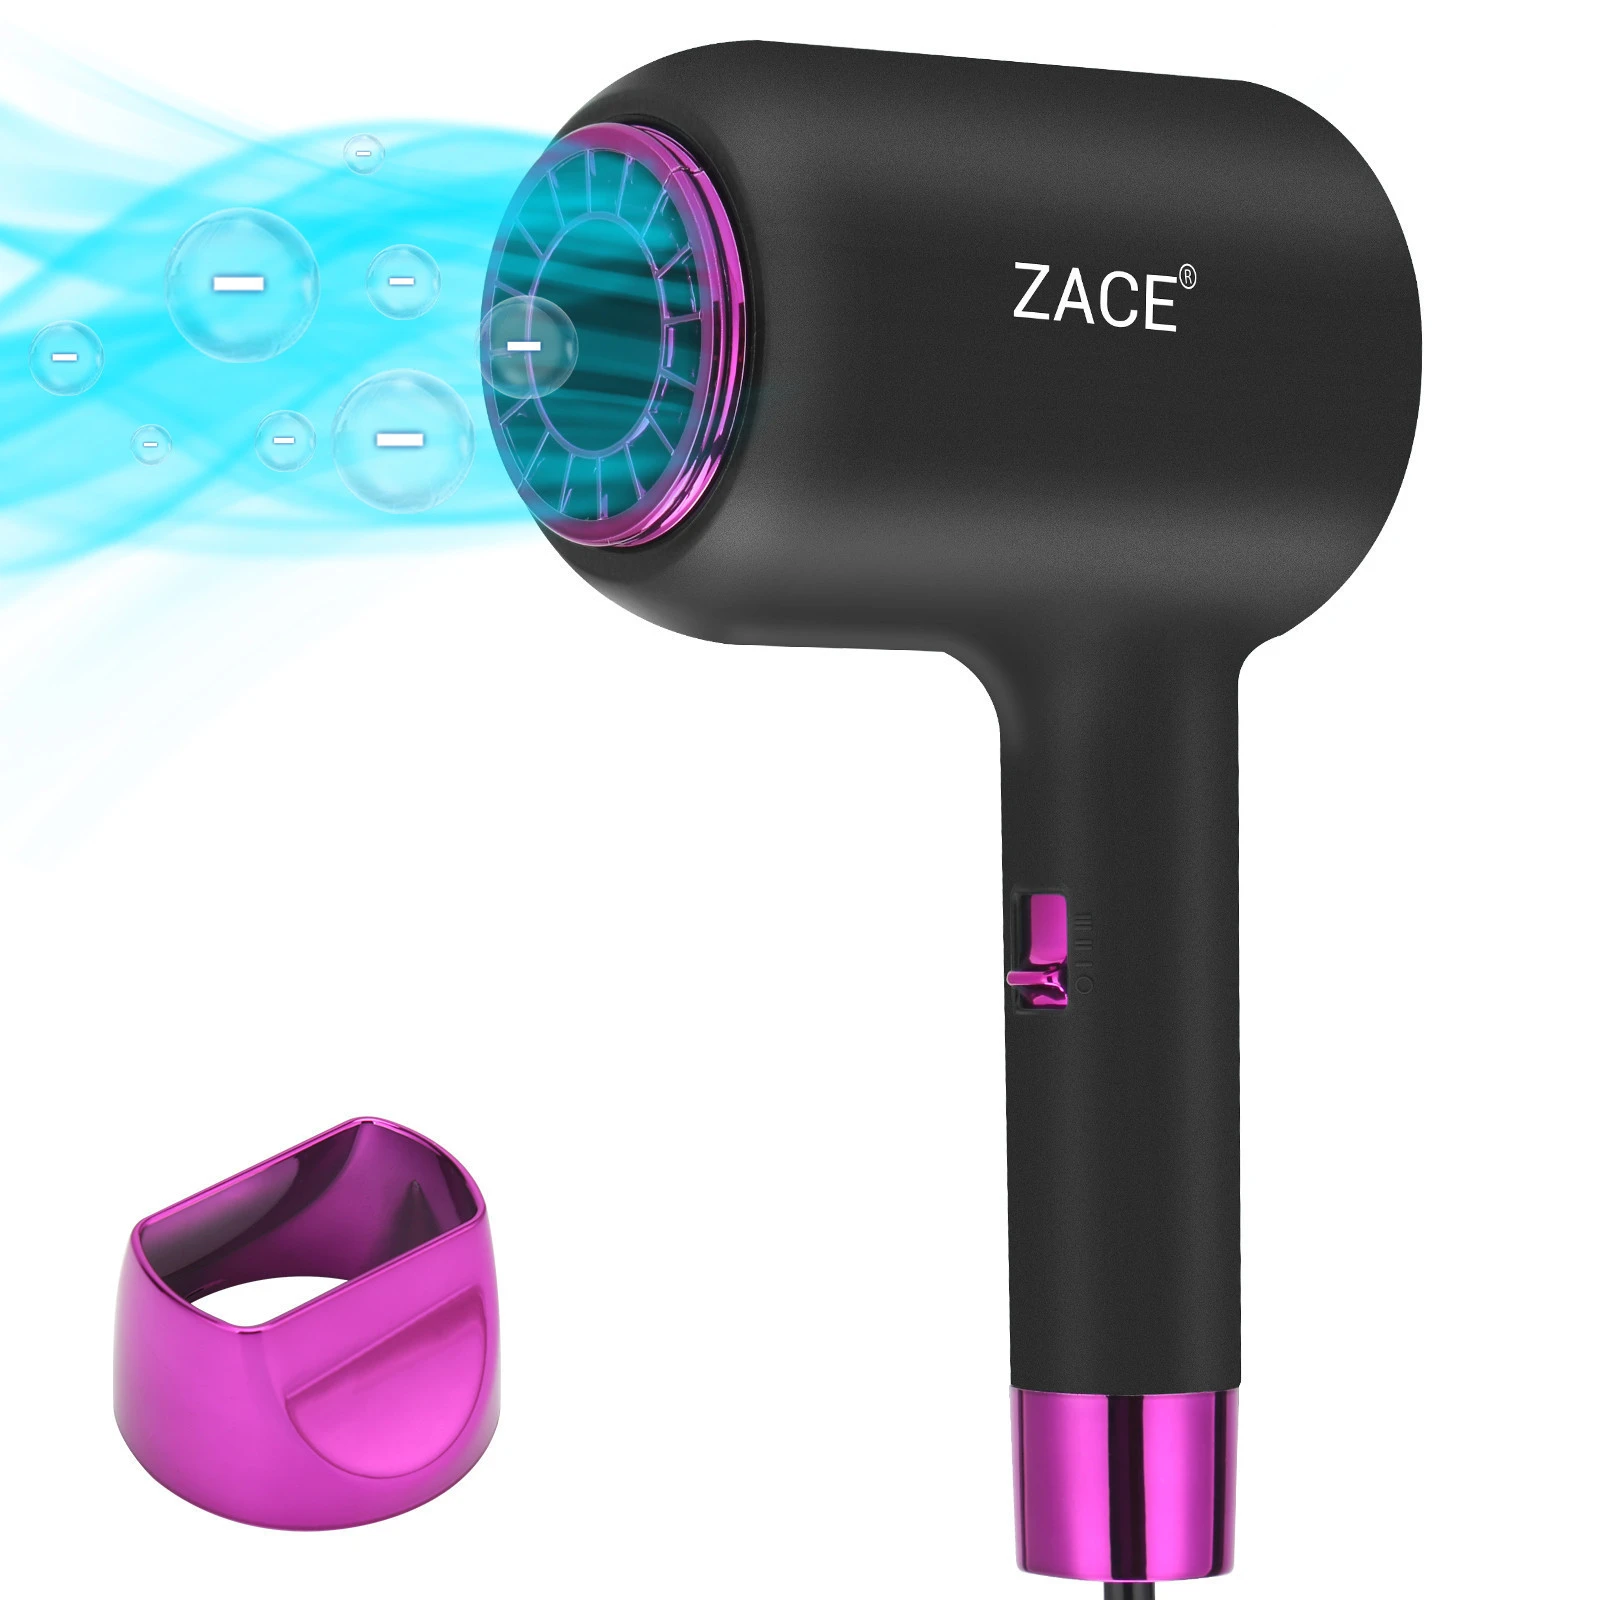 2020 ZACE new compact and big power hair dryer for hotel household